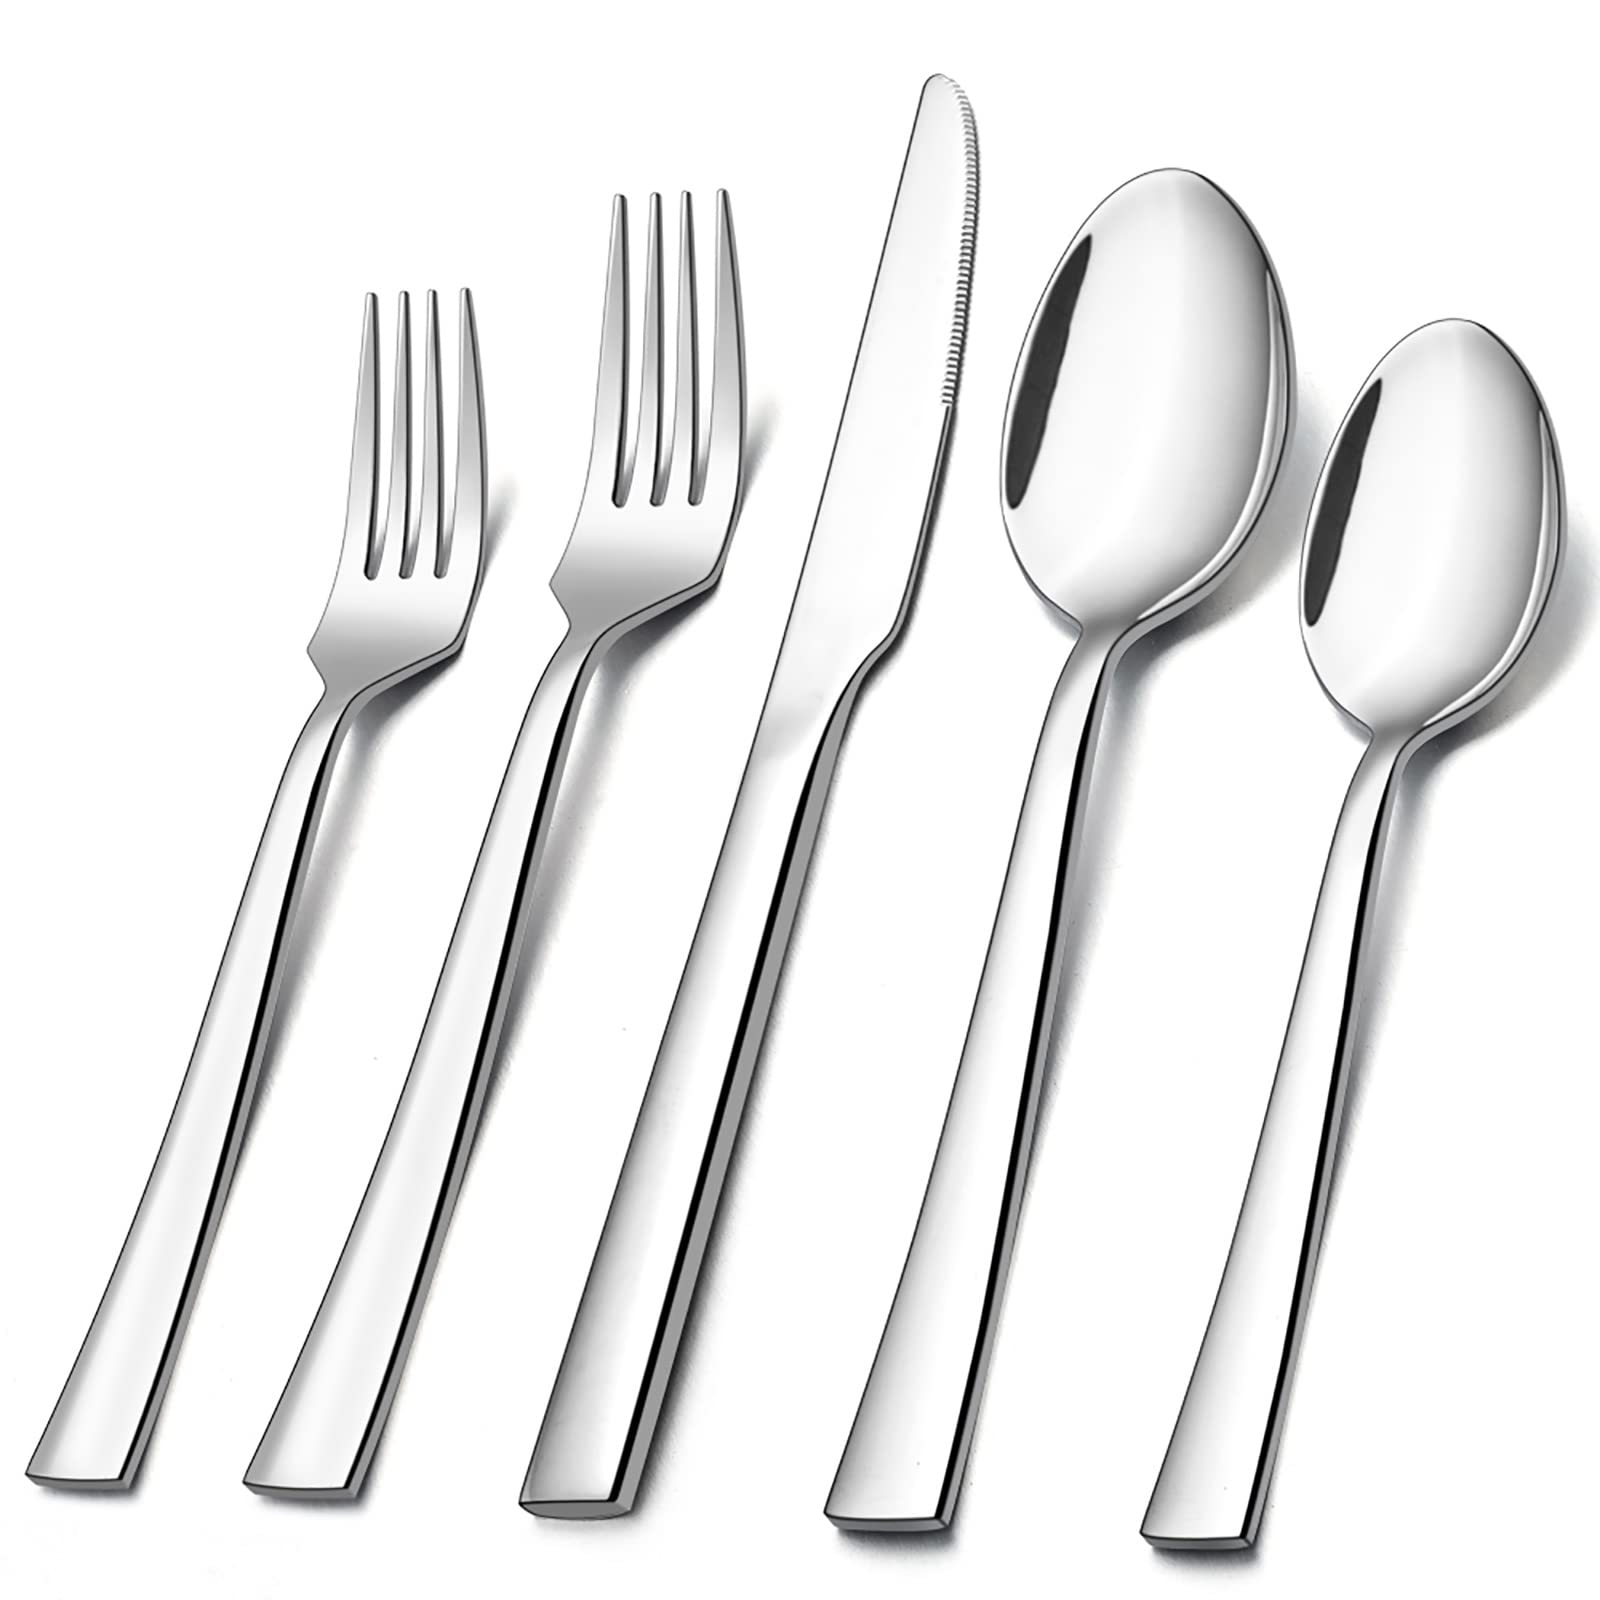 E-far 10-Piece Silverware Set, E-far Stainless Steel Flatware Set Service for 2, Modern Tableware Cutlery Set for Home and Restaurant,